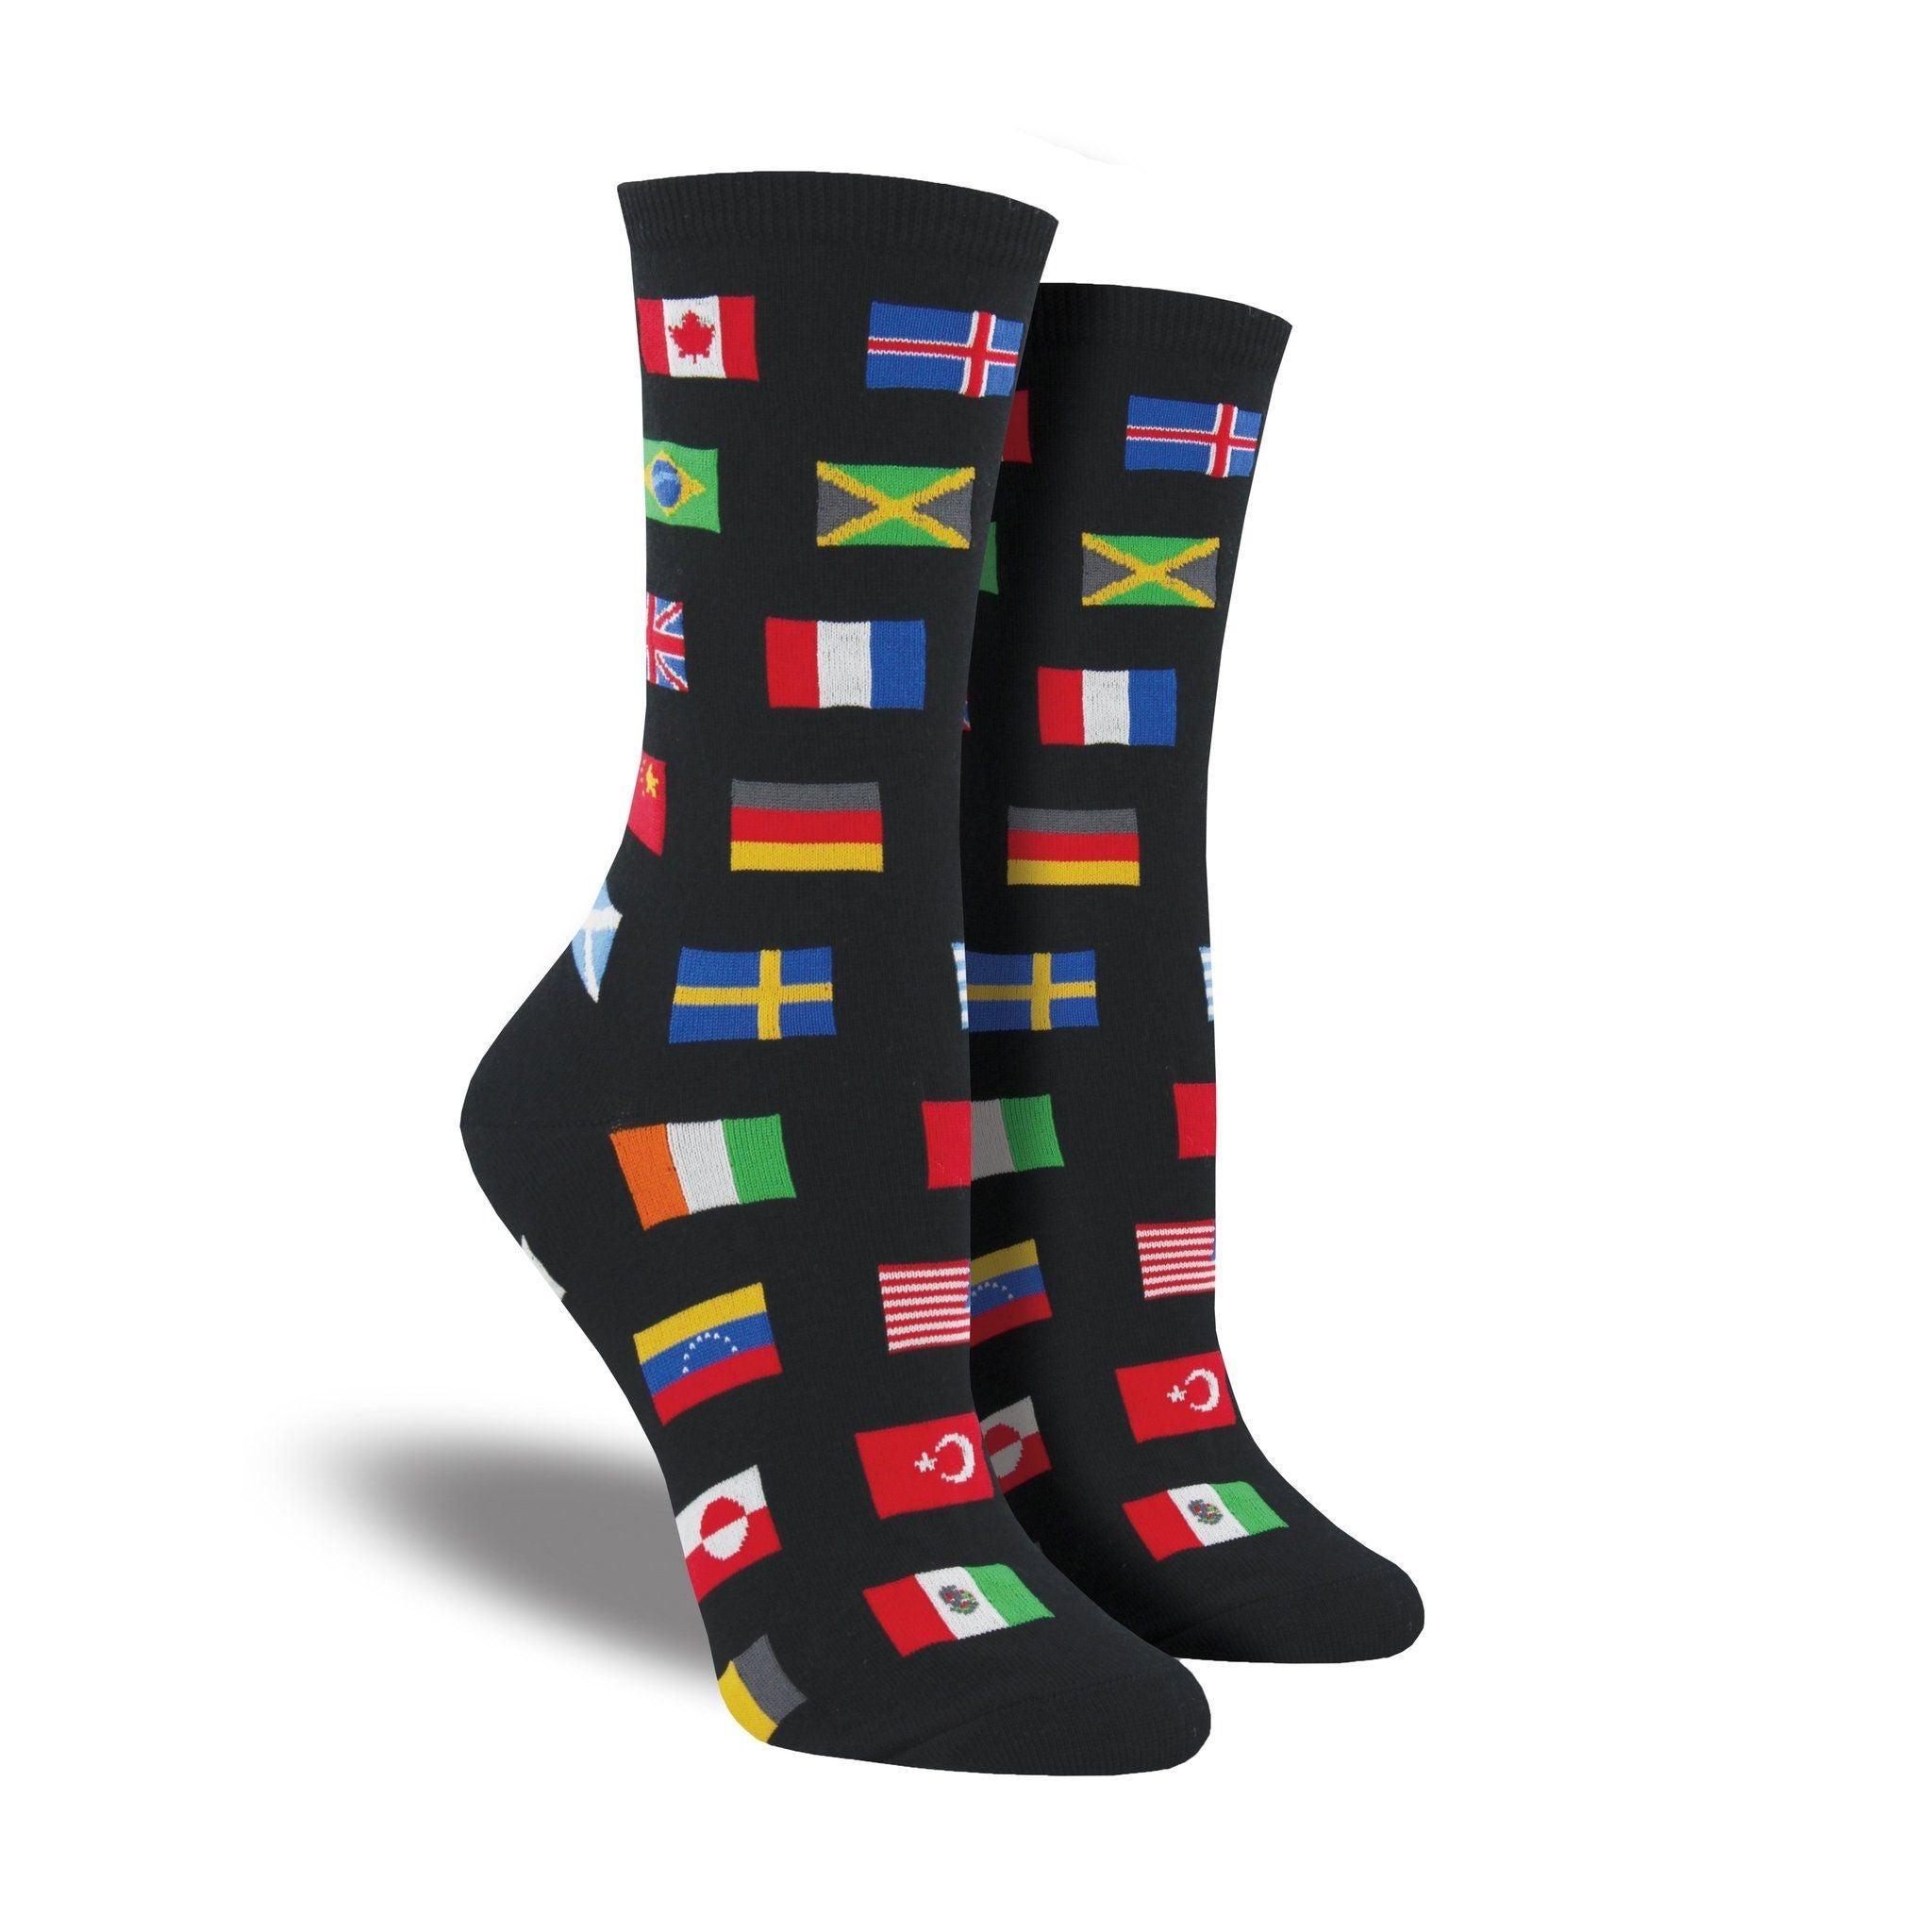 A pair of women's crew socks featuring world flags.